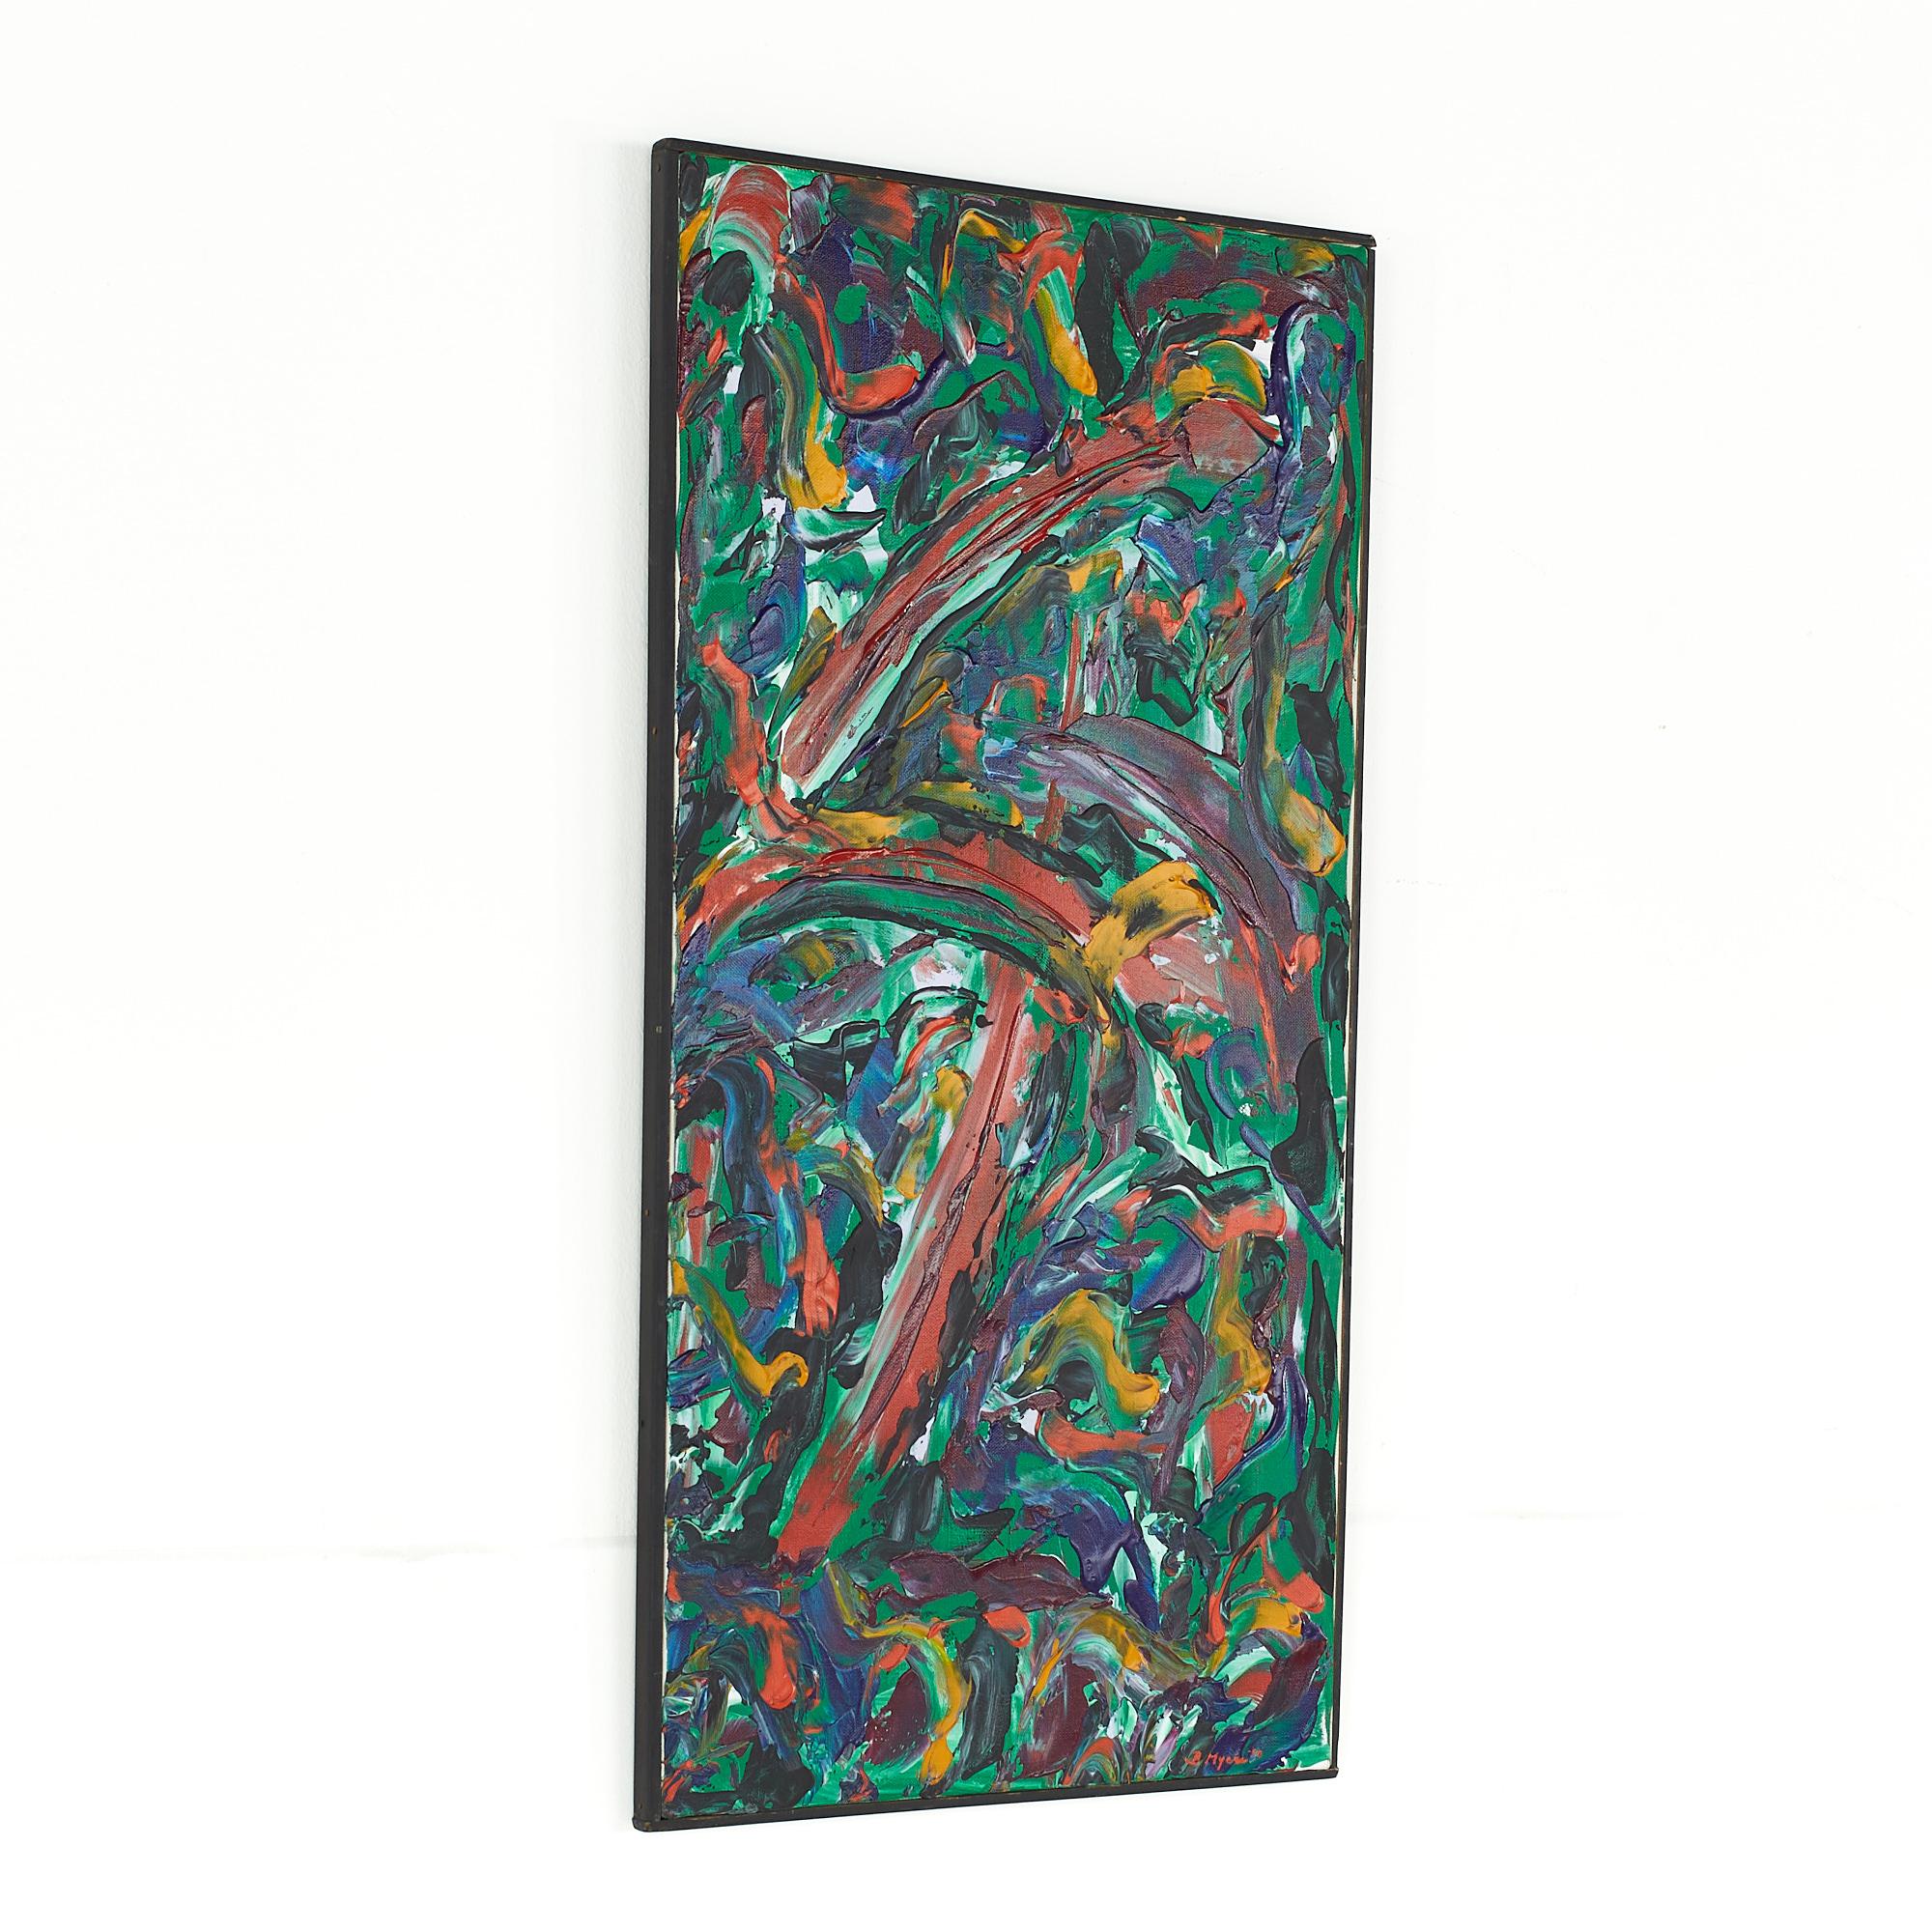 Bruce Myers mid-century abstract original oil on canvas painting.

This painting measures: 15.5 wide x .75 deep x 30.5 inches high.

This painting is in good vintage condition.

We take our photos in a controlled lighting studio to show as